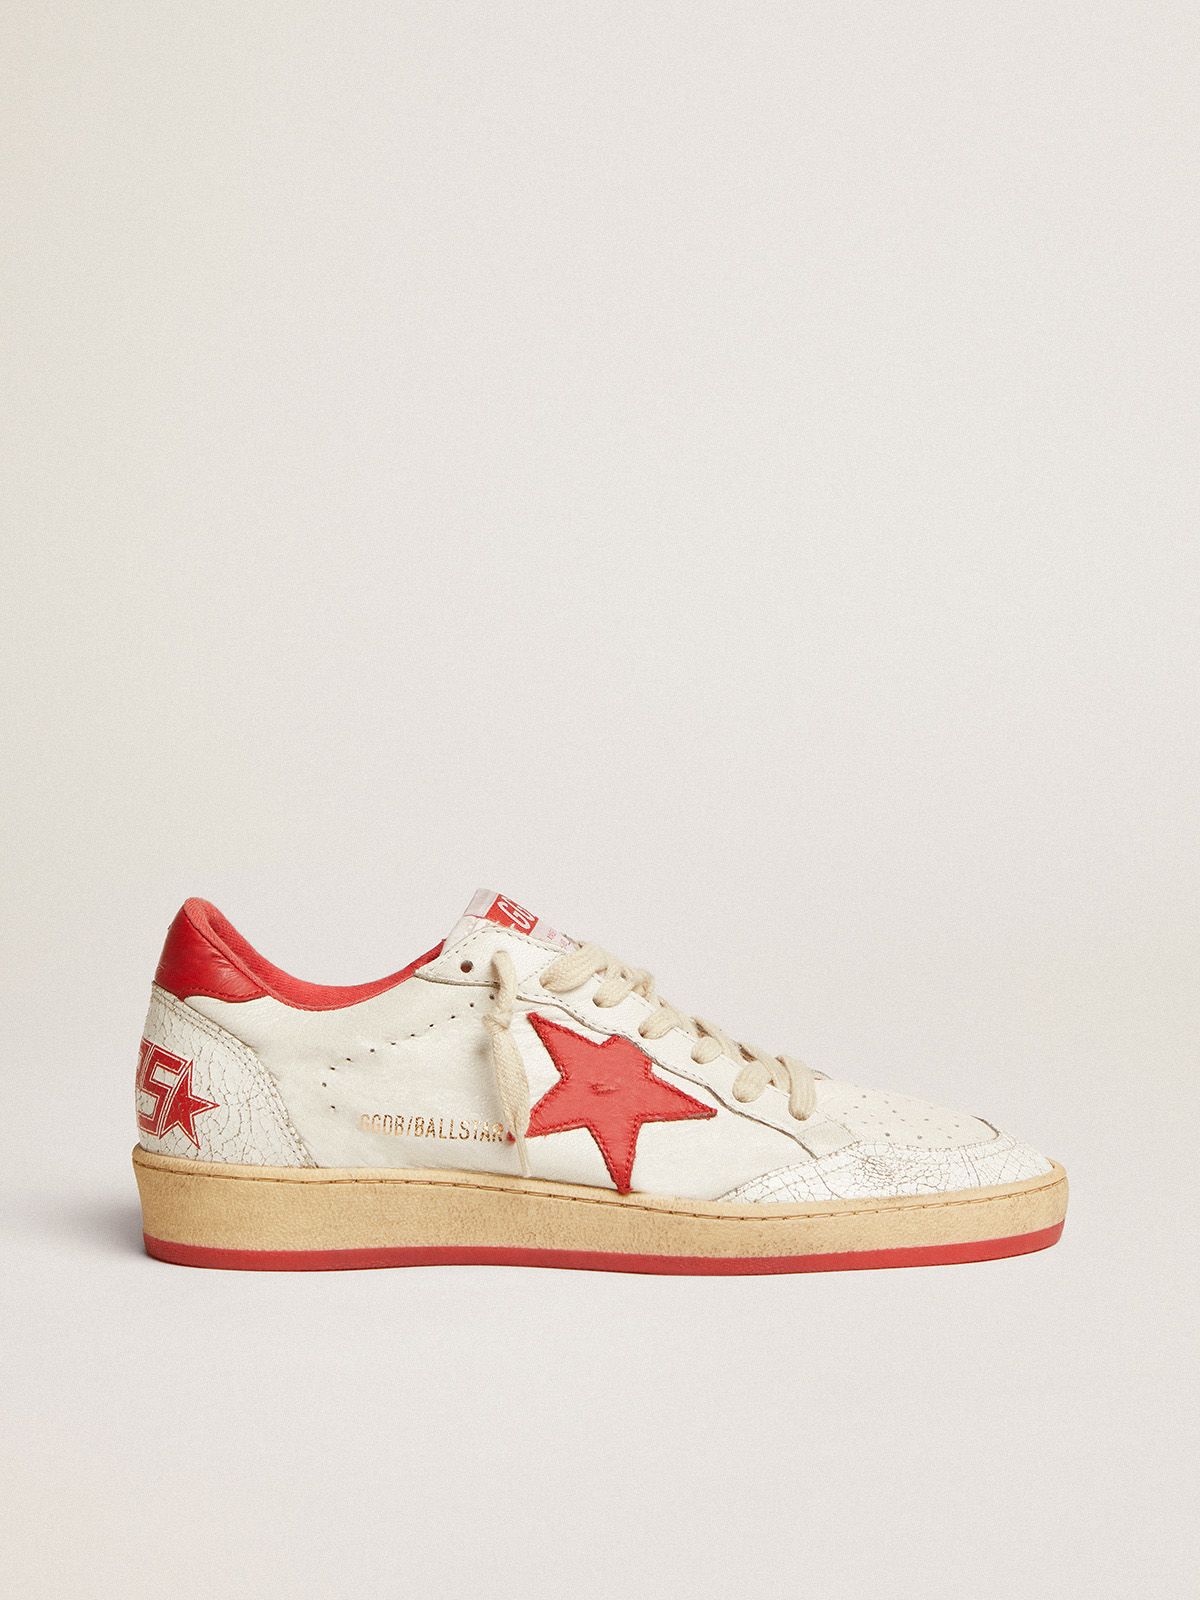 Golden Goose Sneakers Donna White Ball Star sneakers in leather with red star and heel tab